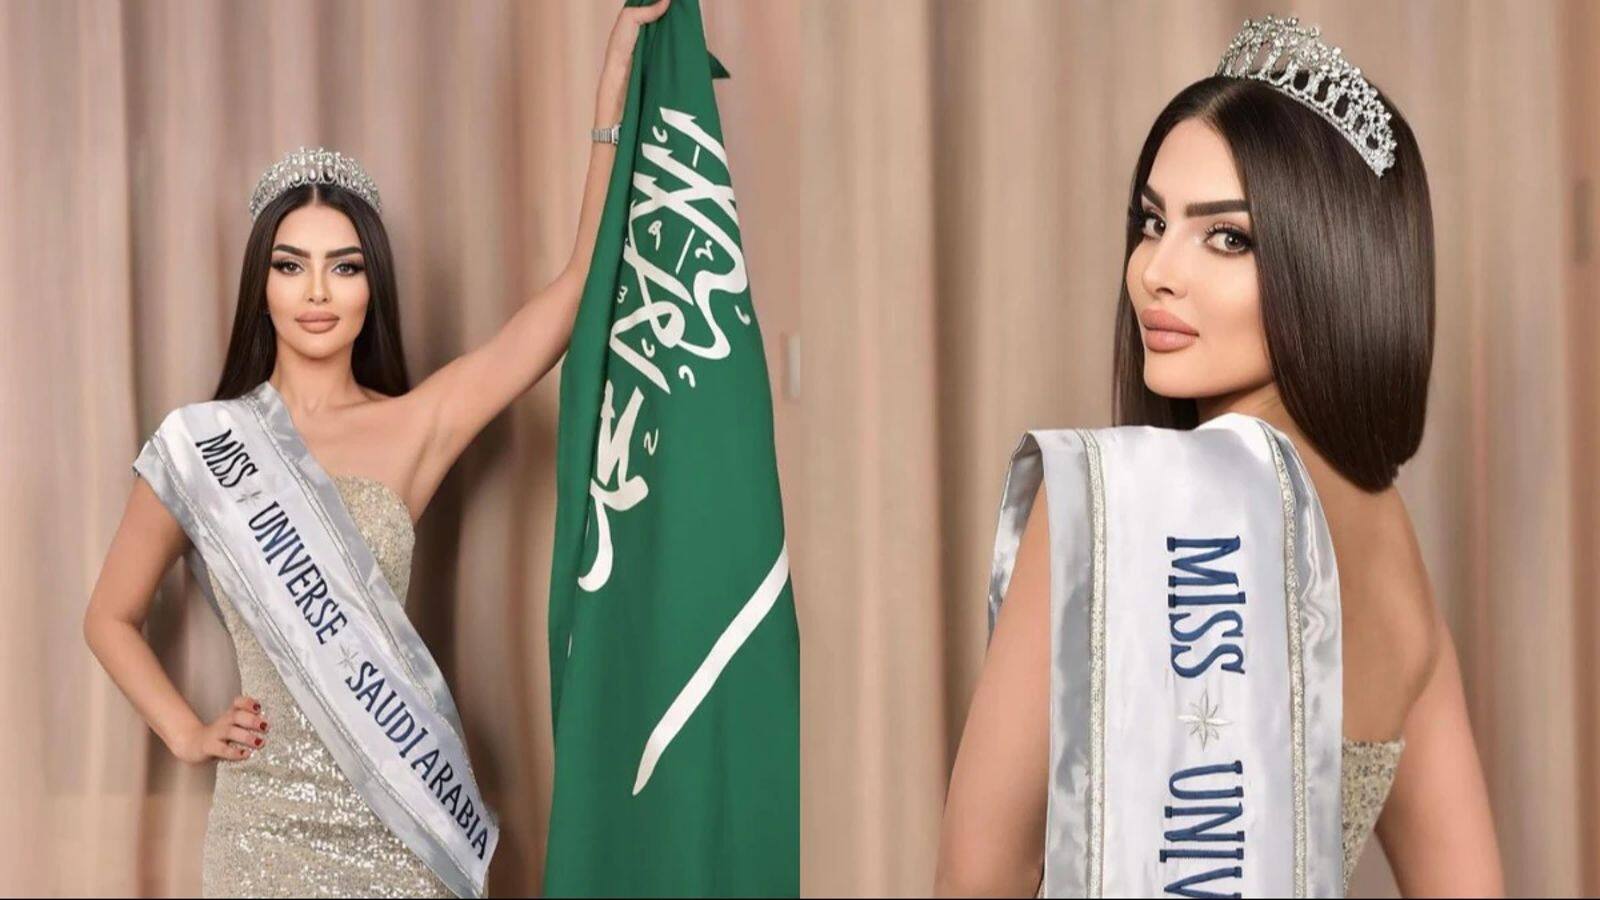 Saudi Arabia to participate in Miss Universe for first time!